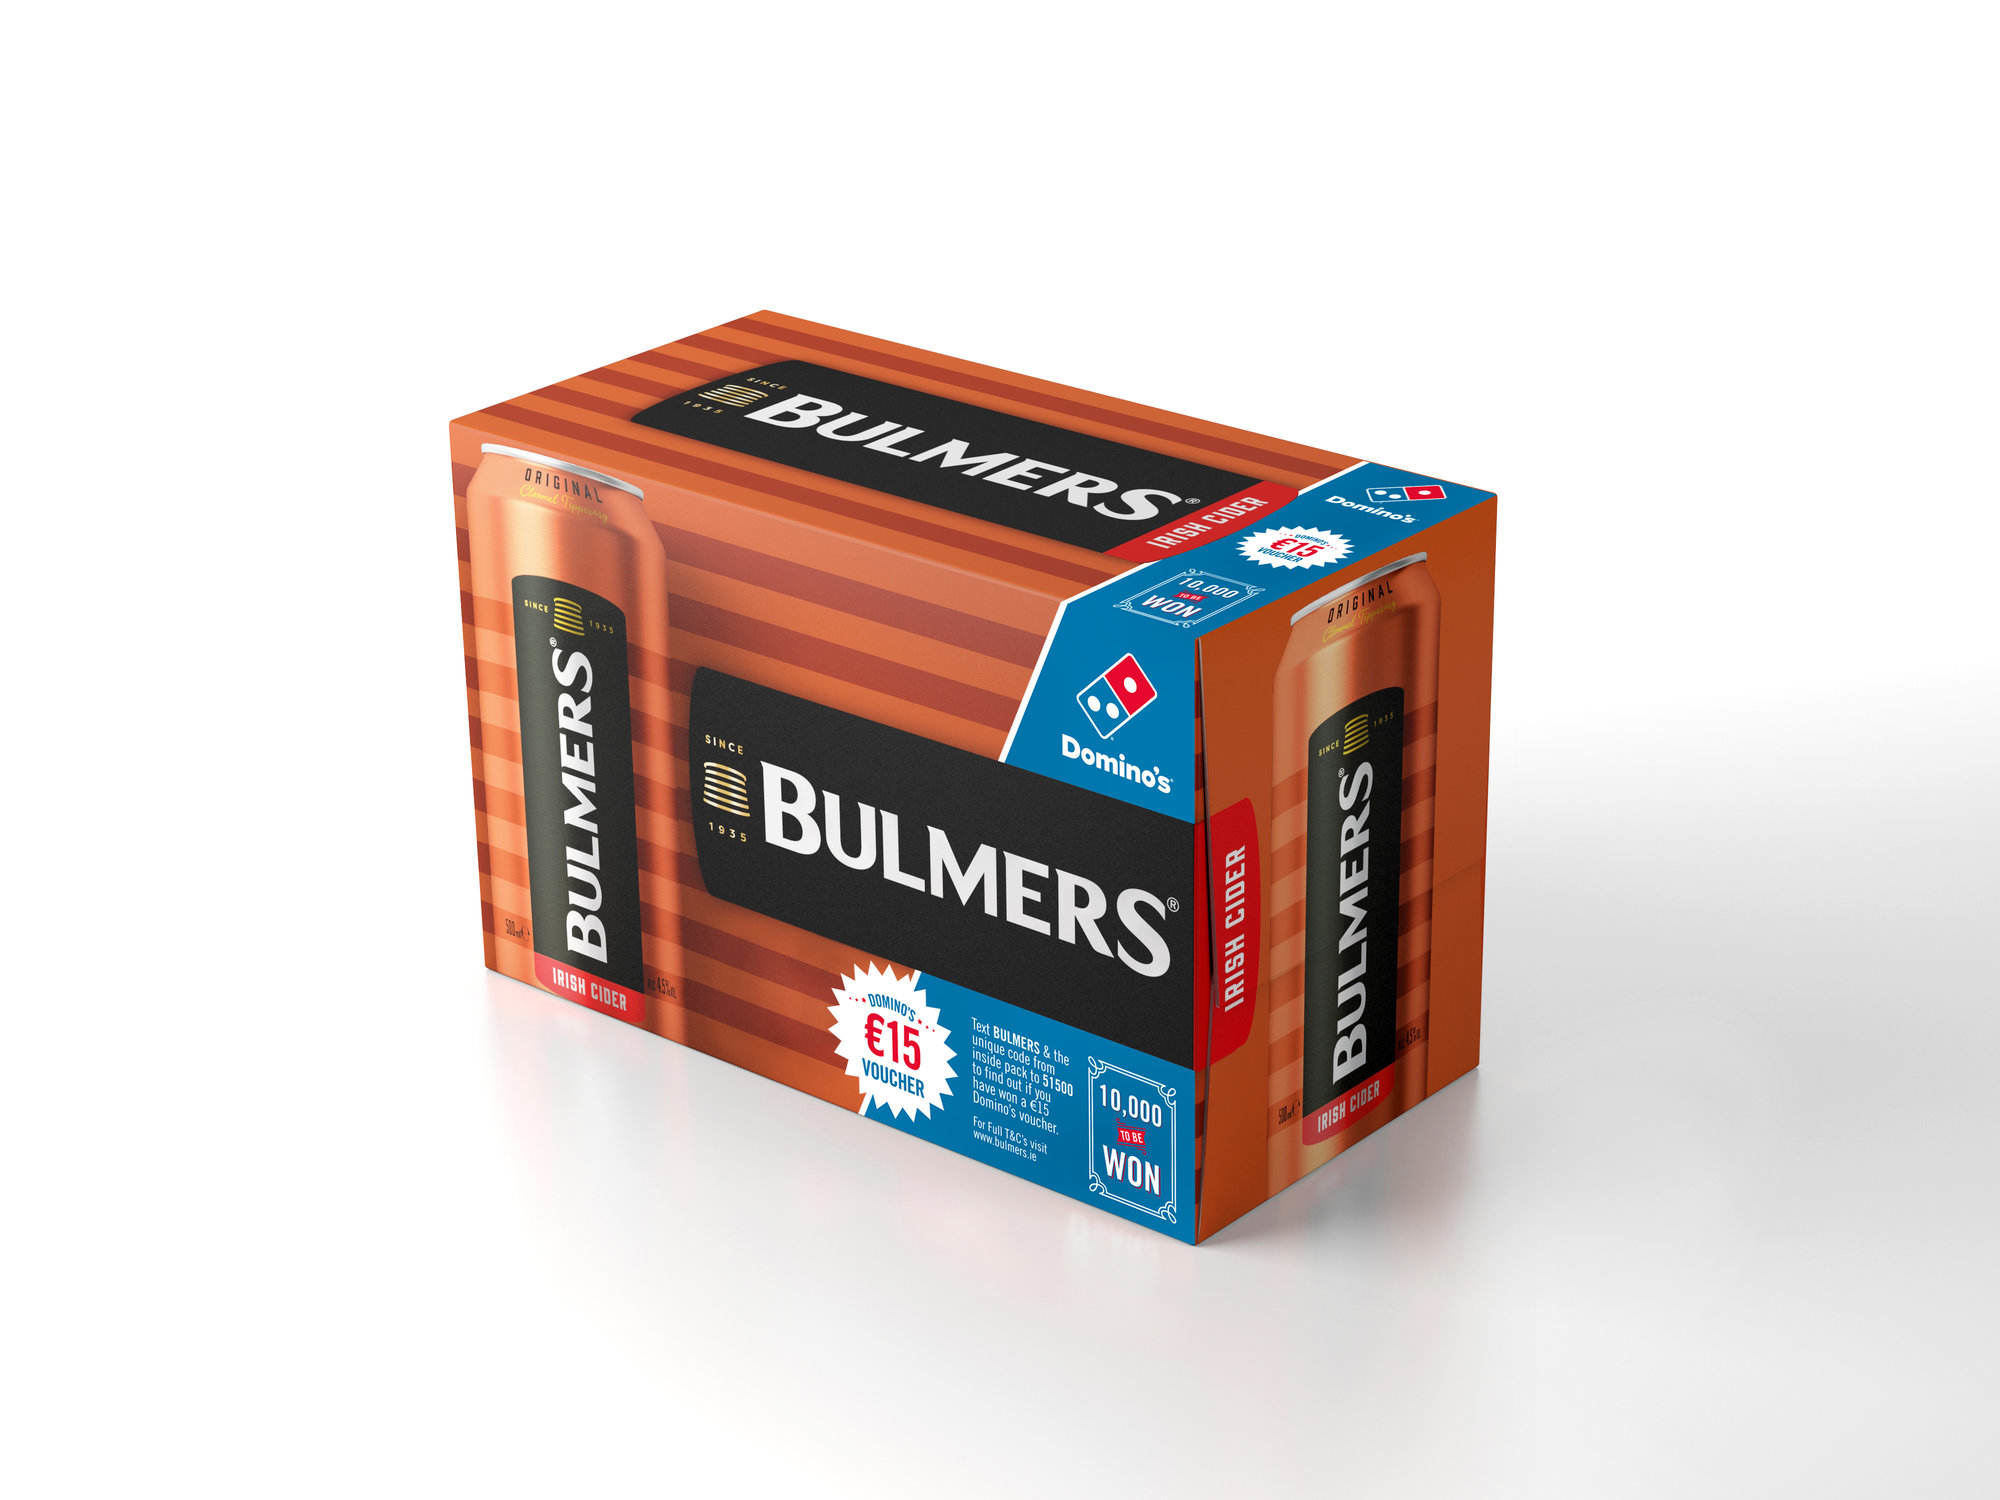 The Bulmers promotion runs across eight-packs of both Bulmers Original and Light.